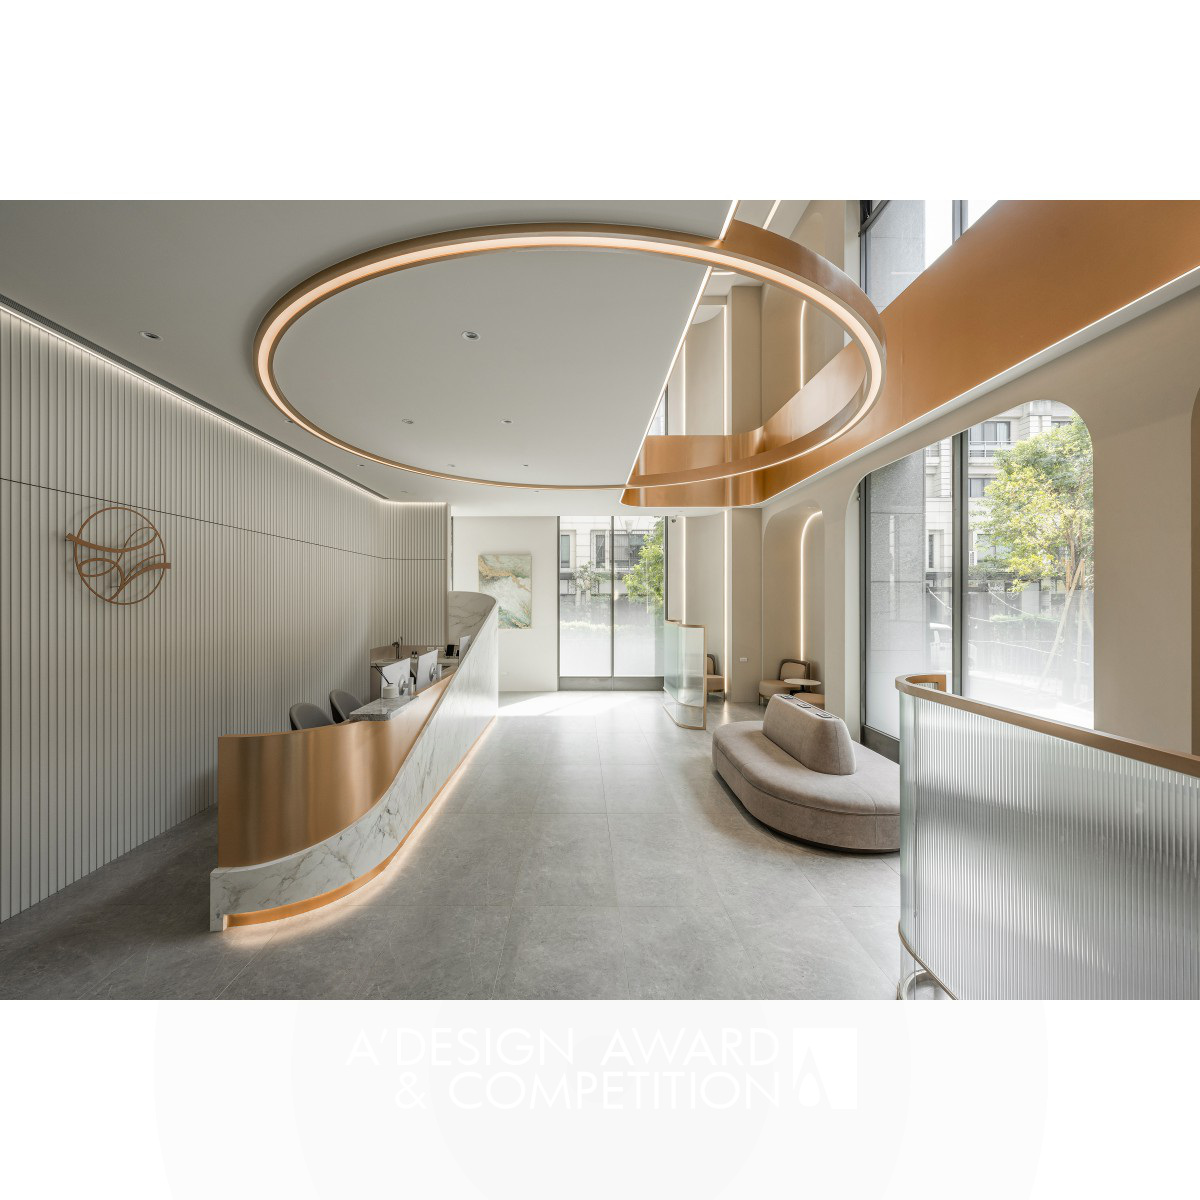 Contour Of Circle Aesthetic Medical Clinic by Chen.chiawen